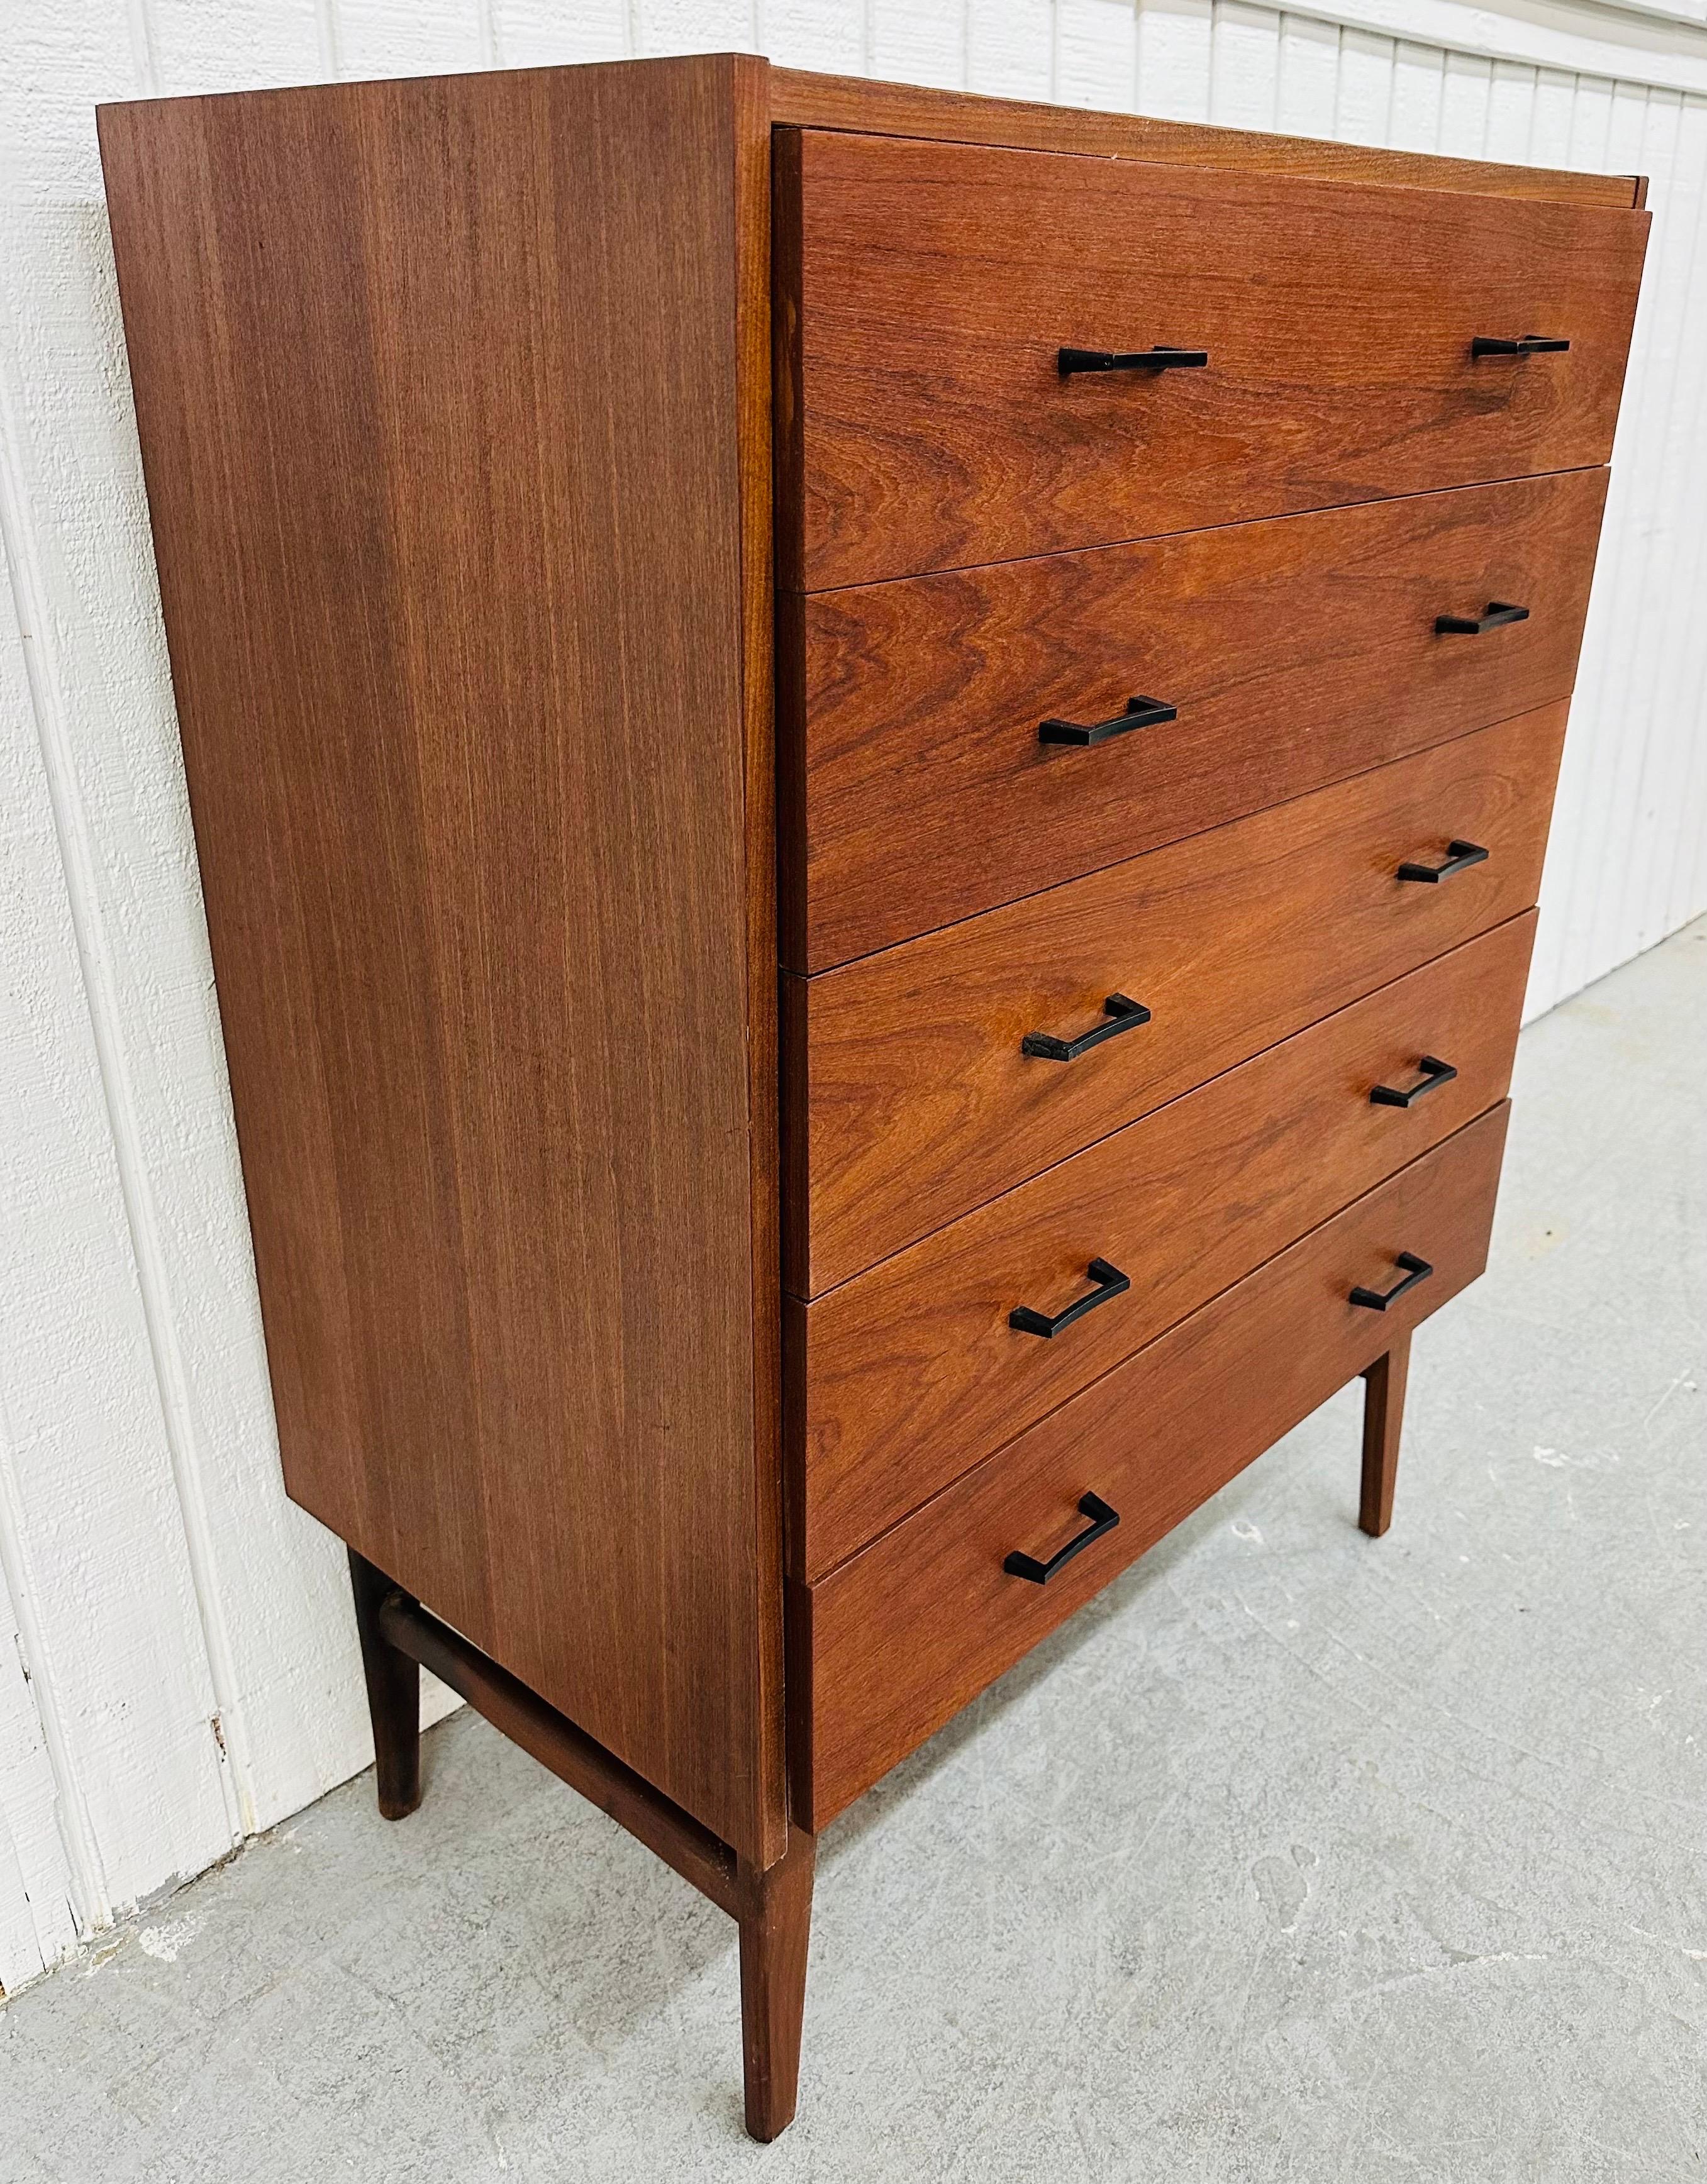 This listing is for a Mid-Century Modern Teak High Chest. Featuring a straight line design, five drawers for storage, original black metal pulls, modern legs, and a beautiful walnut finish. This is an exceptional combination of quality and design!